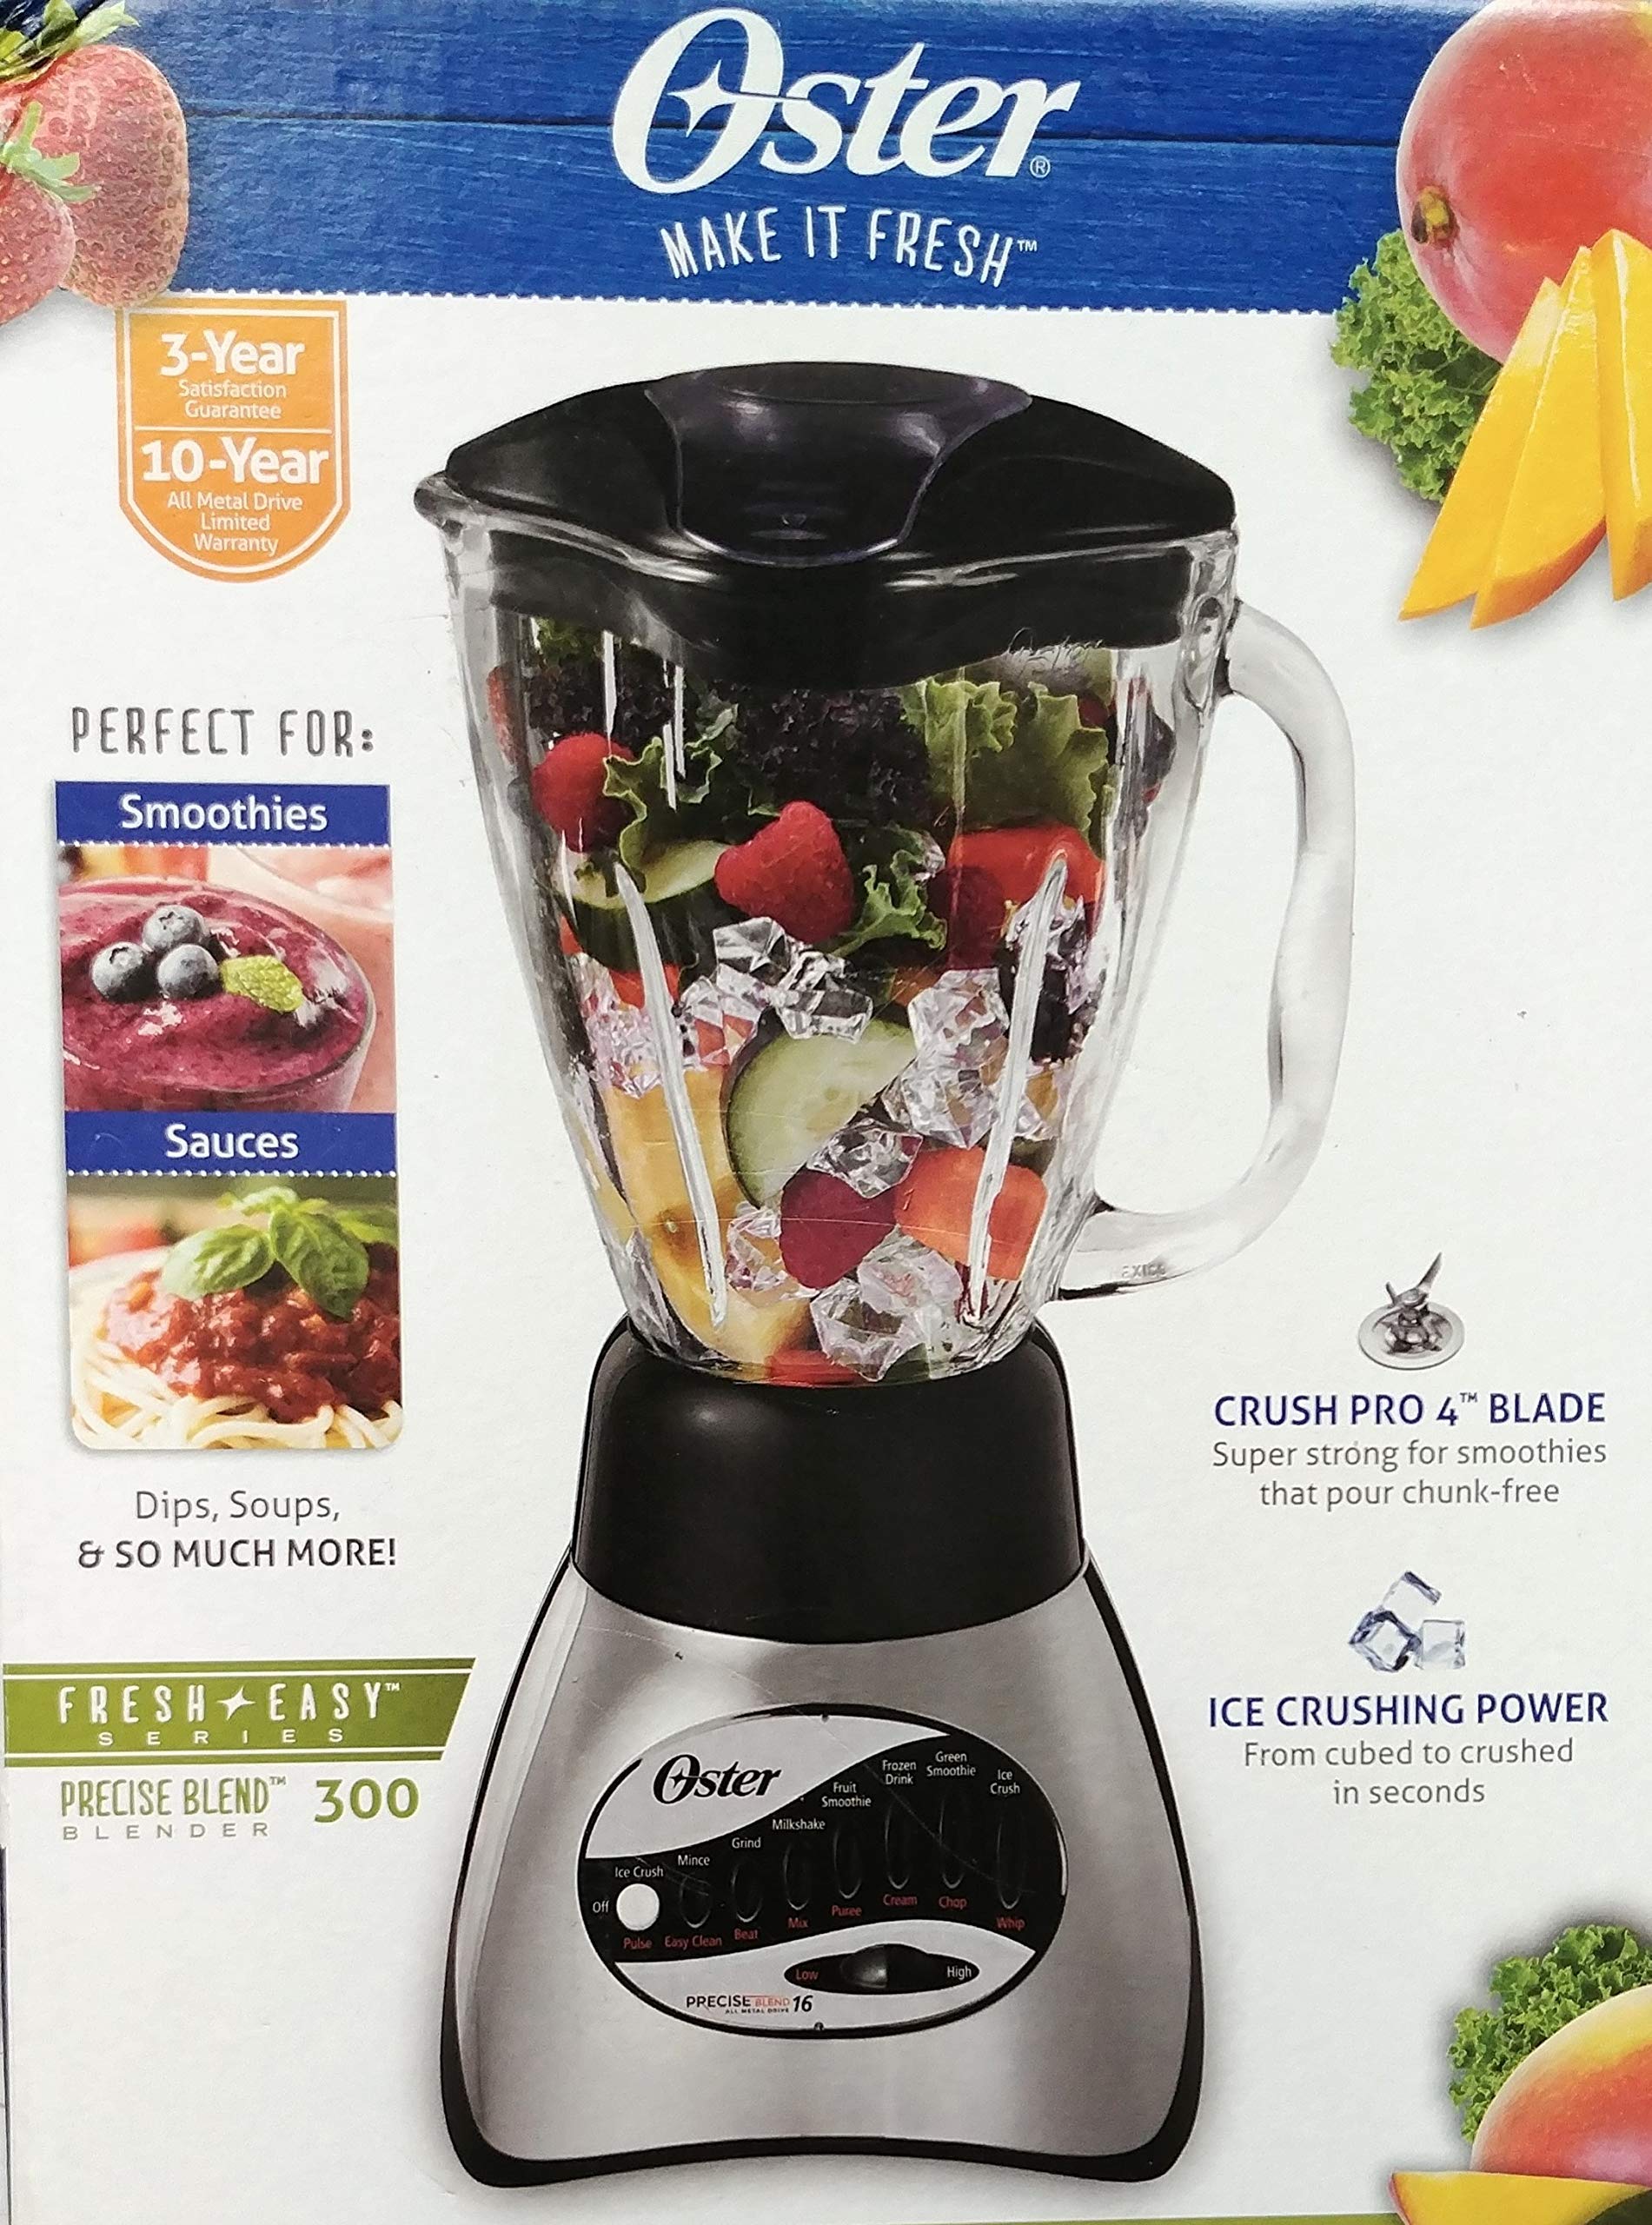 Oster 6812-001 Core 16-Speed Blender with Glass Jar, Black & Blender 6-Cup Glass Jar, Lid, Black and clear